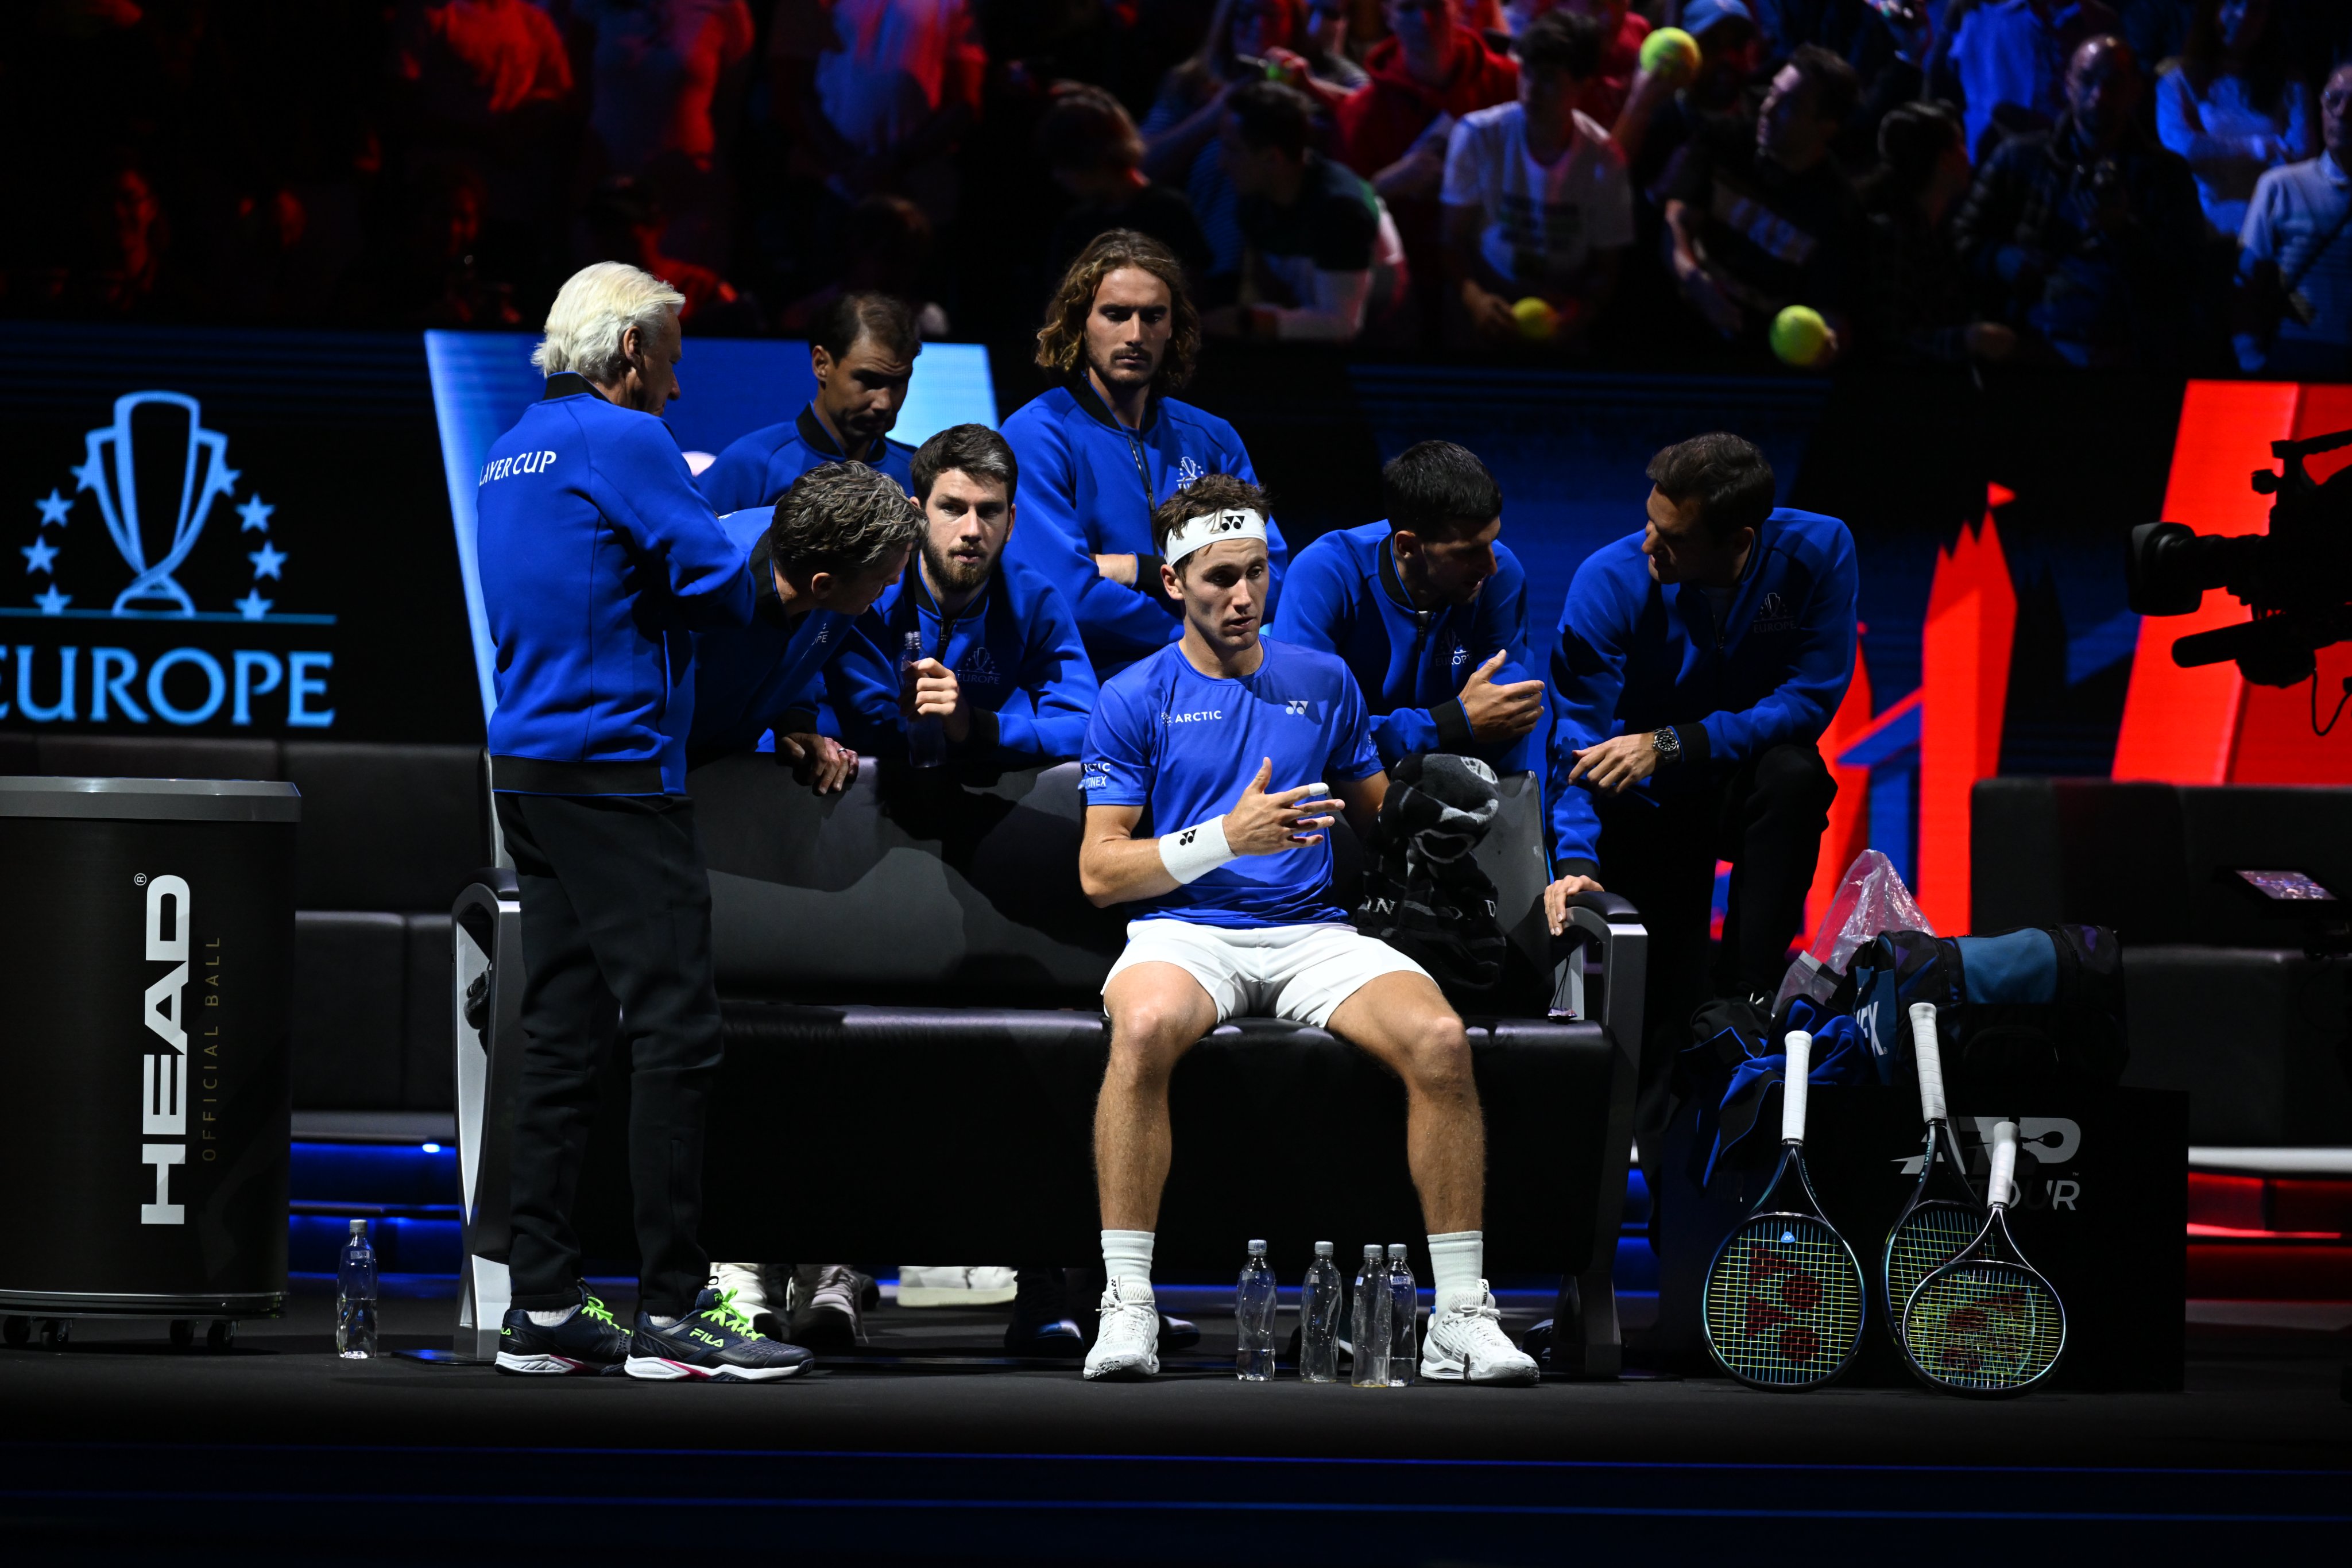 Laver Cup 2022 - Day 1: Roger's Last Match (Sep 23)  FdWTAzrXkAMpLOW?format=jpg&name=4096x4096